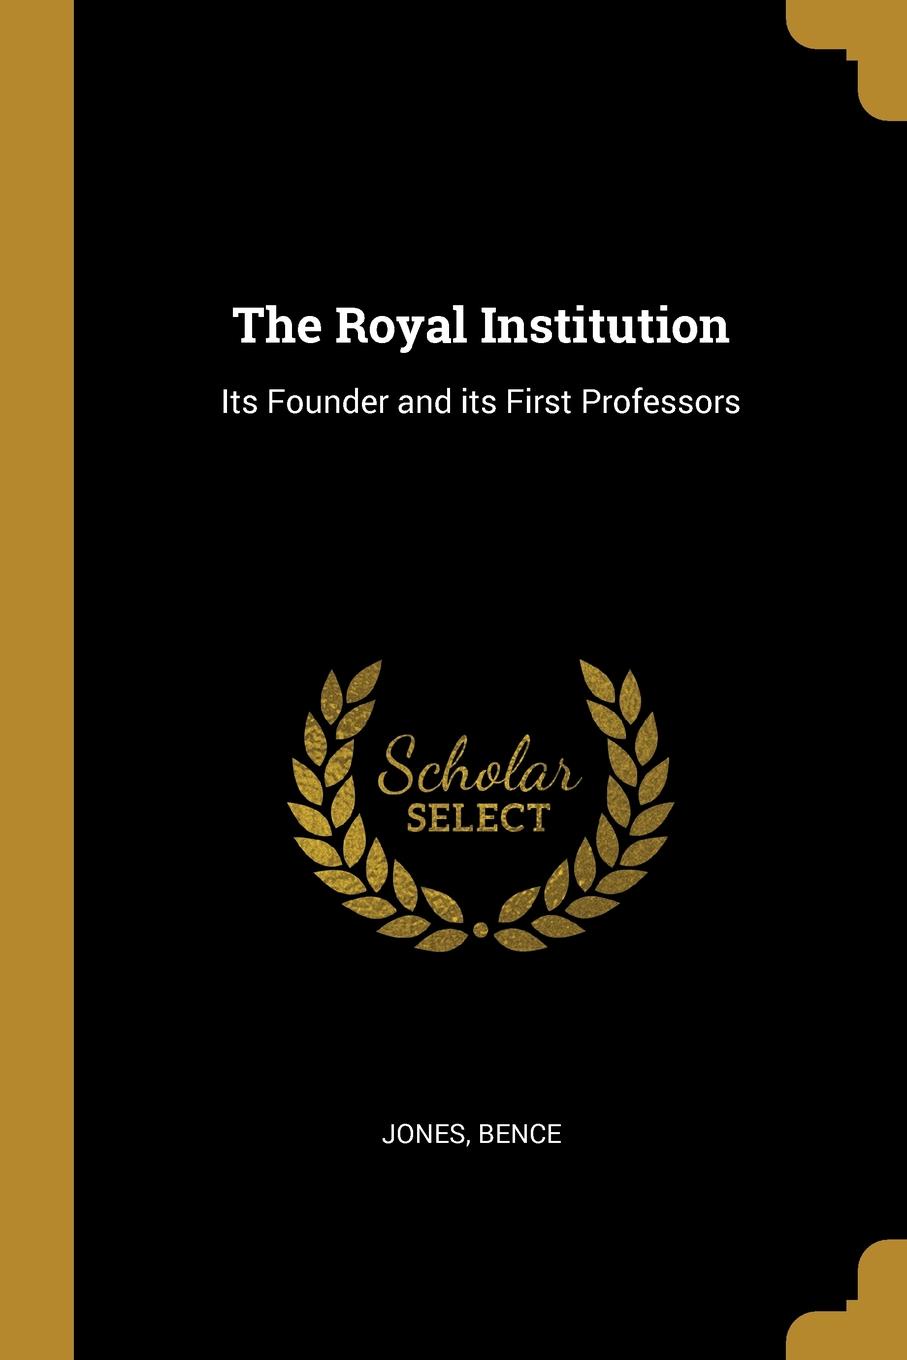 The Royal Institution. Its Founder and its First Professors